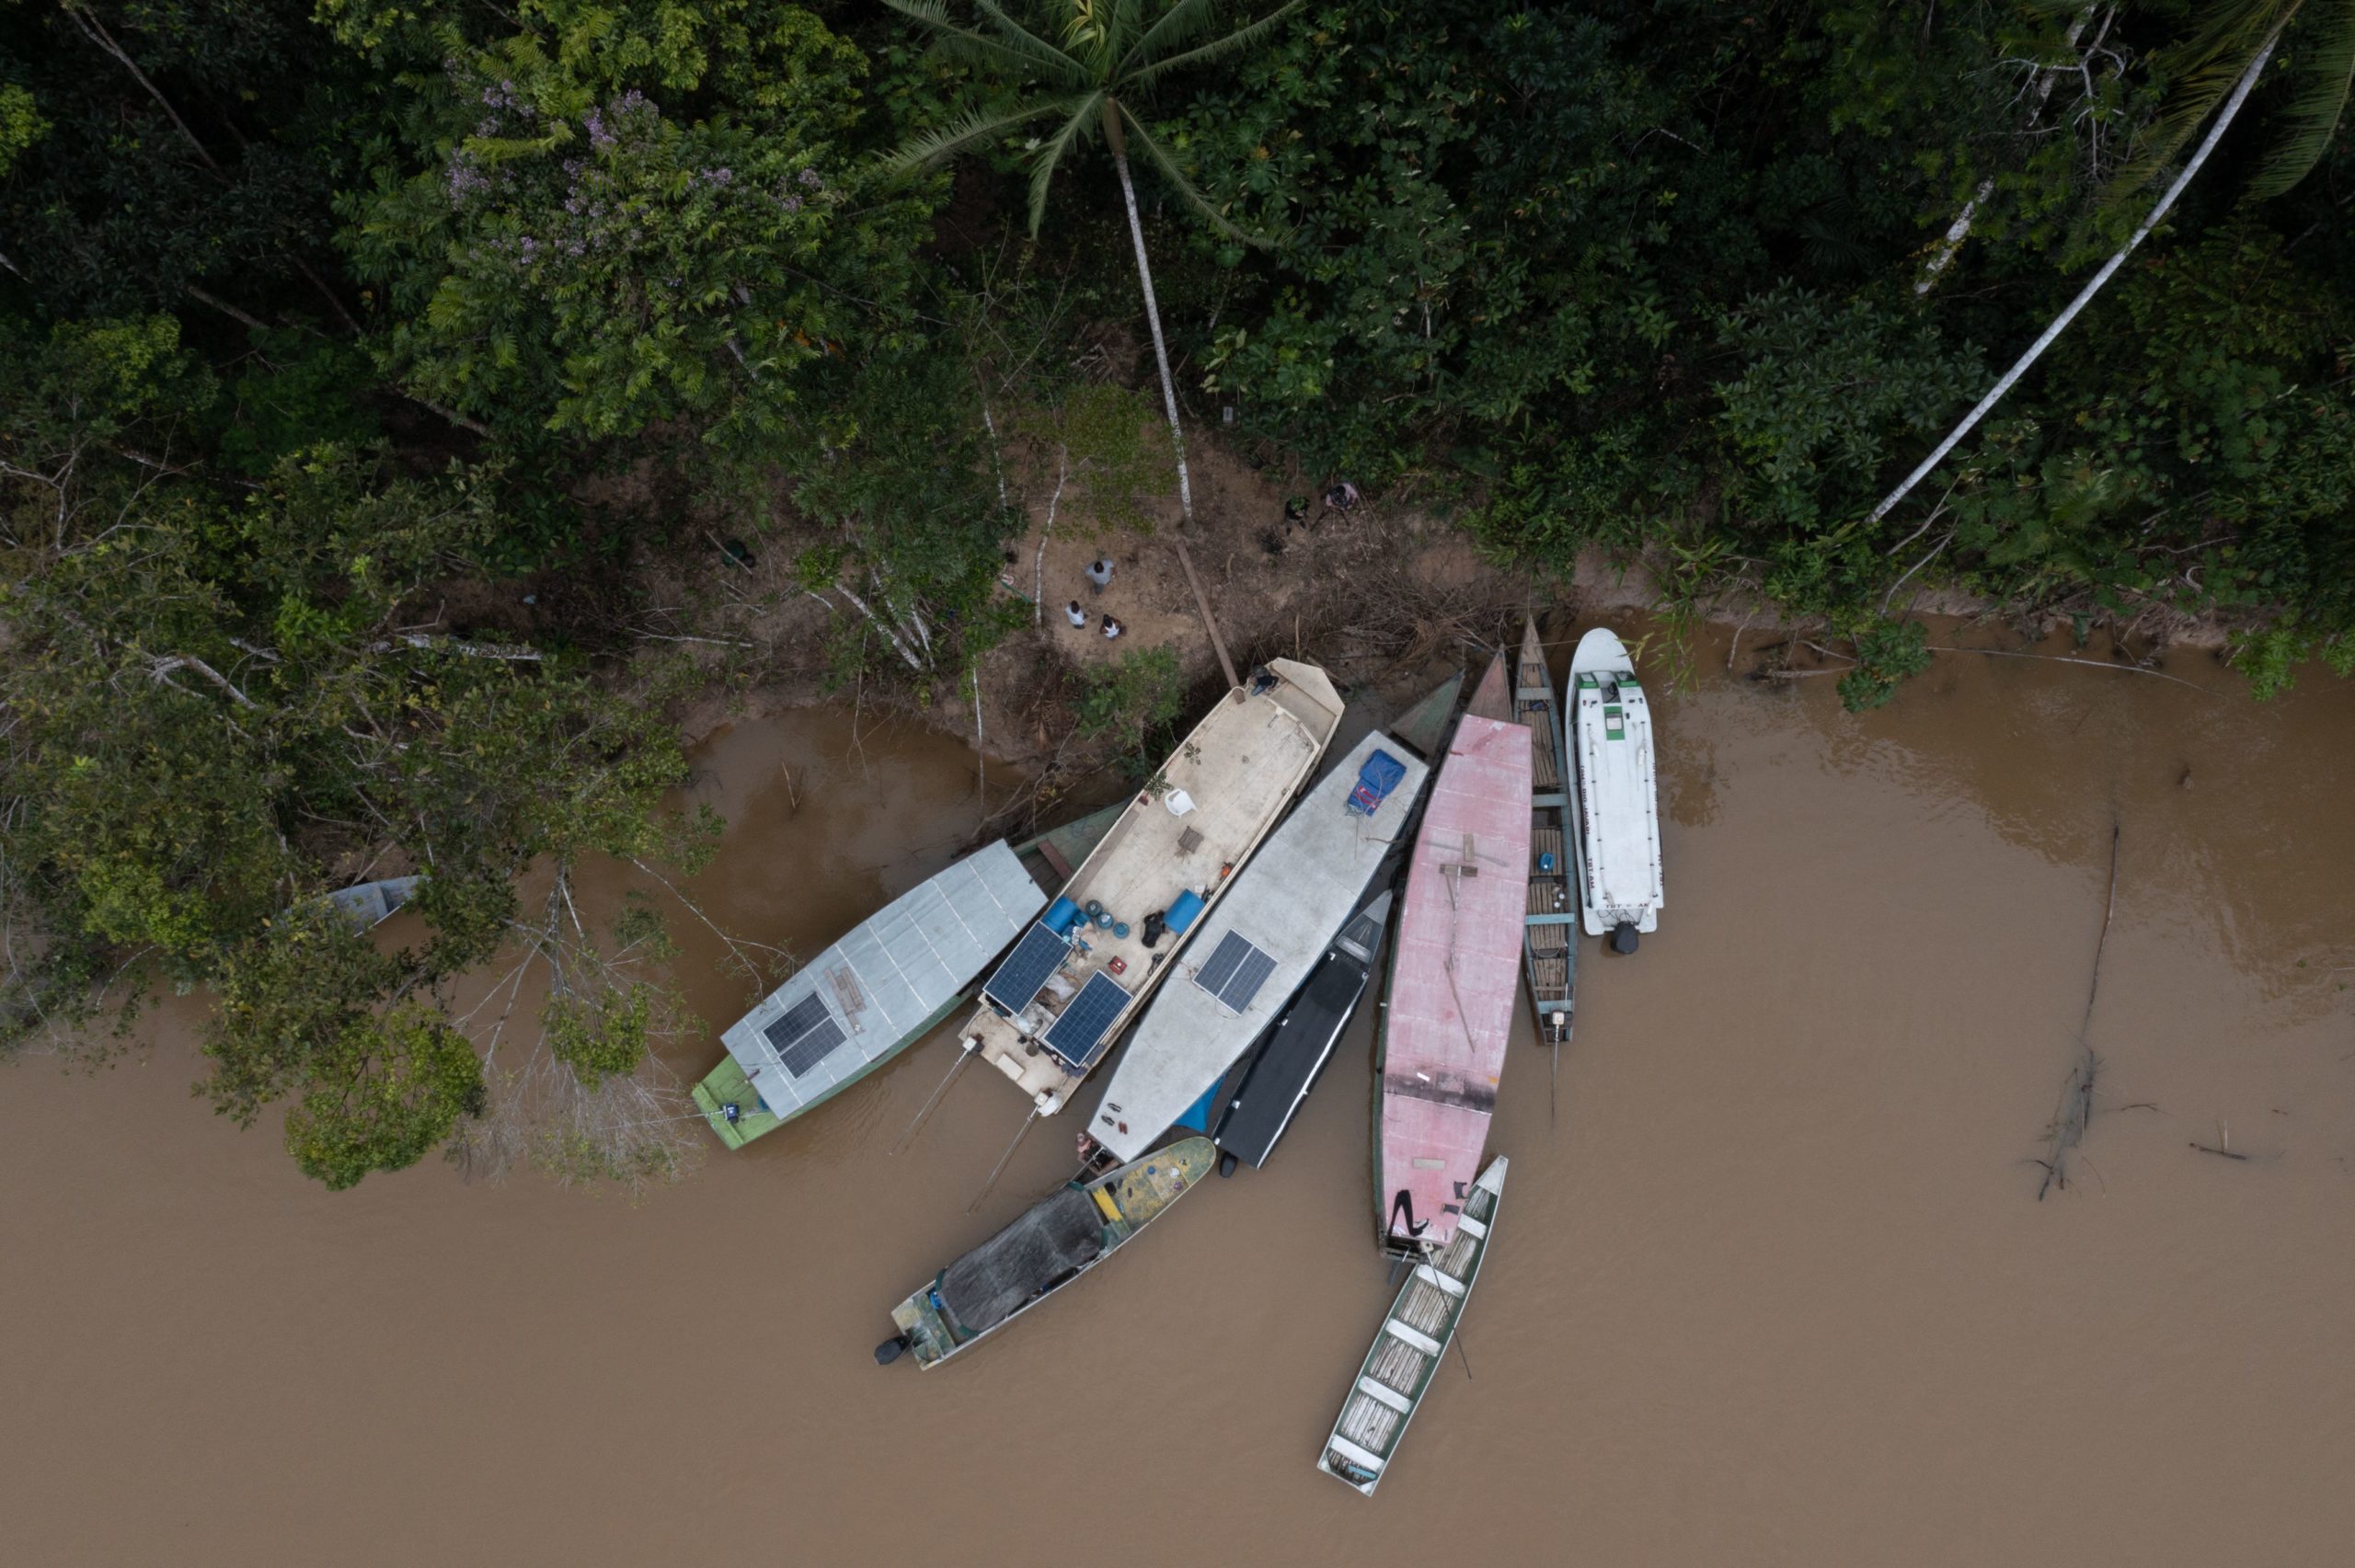 Aerial view showing indigenous members of the Union of Indigenous Peoples of the Javari Valley (UNIVAJA) who are looking for clues that lead to the whereabouts of veteran correspondent Dom Phillips and respected indigenous specialist Bruno Pereira, gathering on the banks of the Itaguaí river in Vale do Javari, municipality of Atalaia do Norte, state of Amazonas, Brazil, on June 13, 2022. - Human remains have been found in the search for the British journalist and Brazilian indigenous expert who disappeared a week ago Sunday deep in the Amazon after receiving threats, Brazil's president confirmed on June 13. (Photo by Joao LAET / AFP via Getty Images)